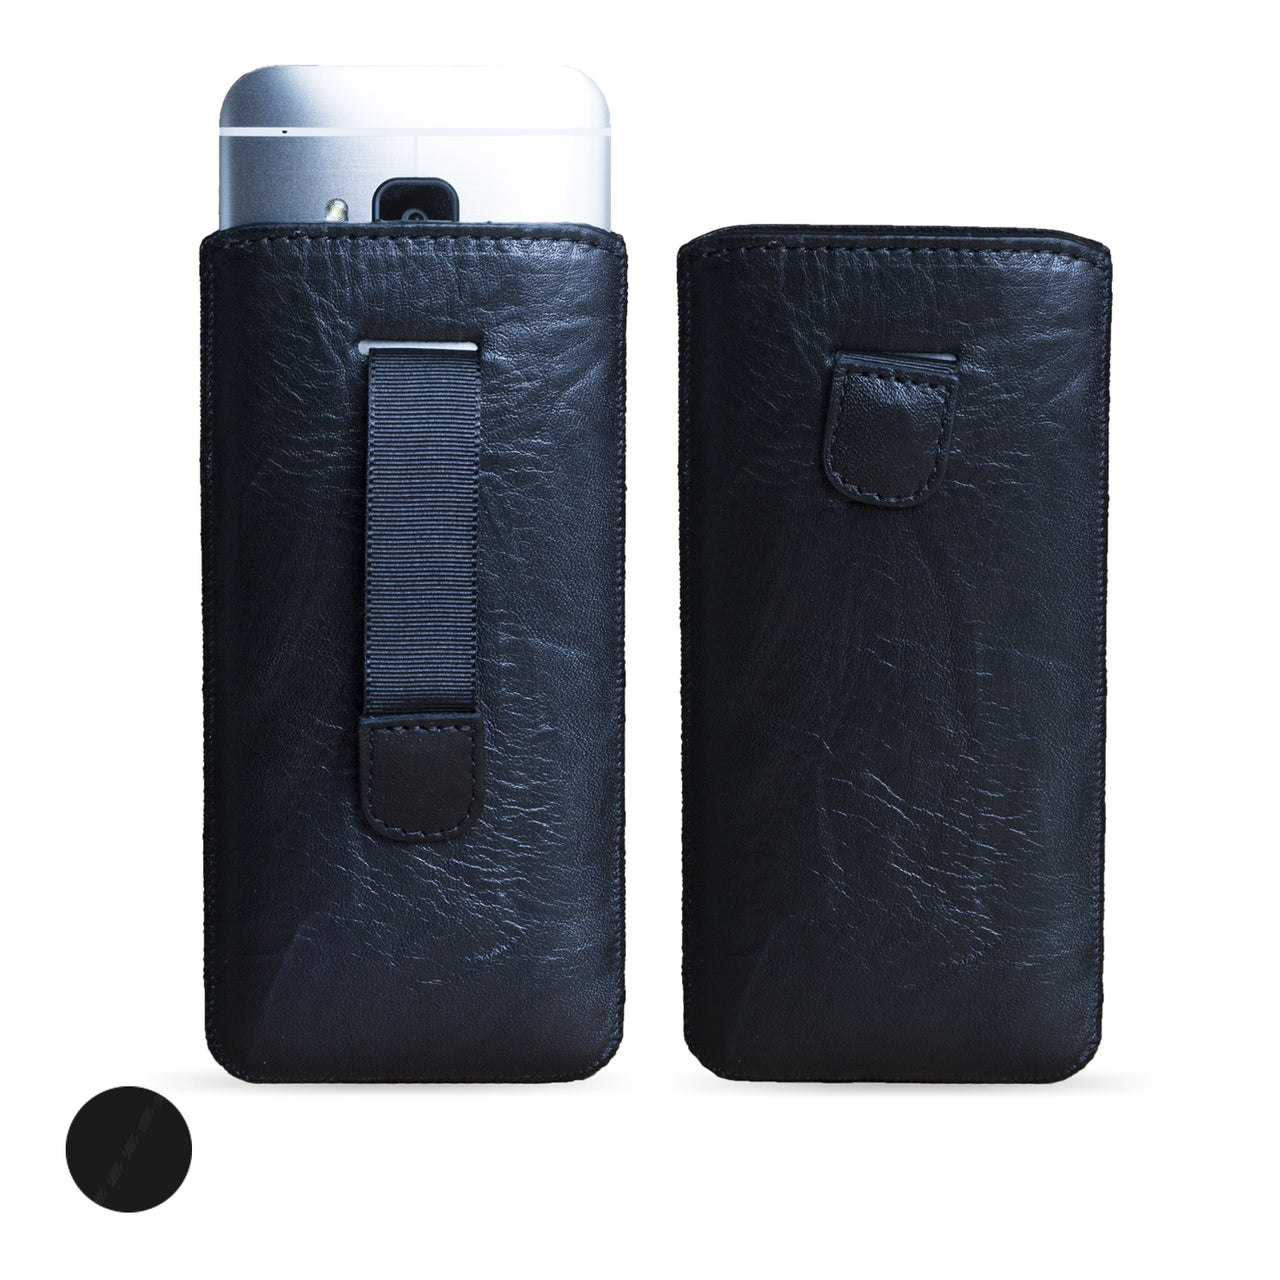 HTC One M9 Genuine Leather Pouch Sleeve Case | Artisanpouch